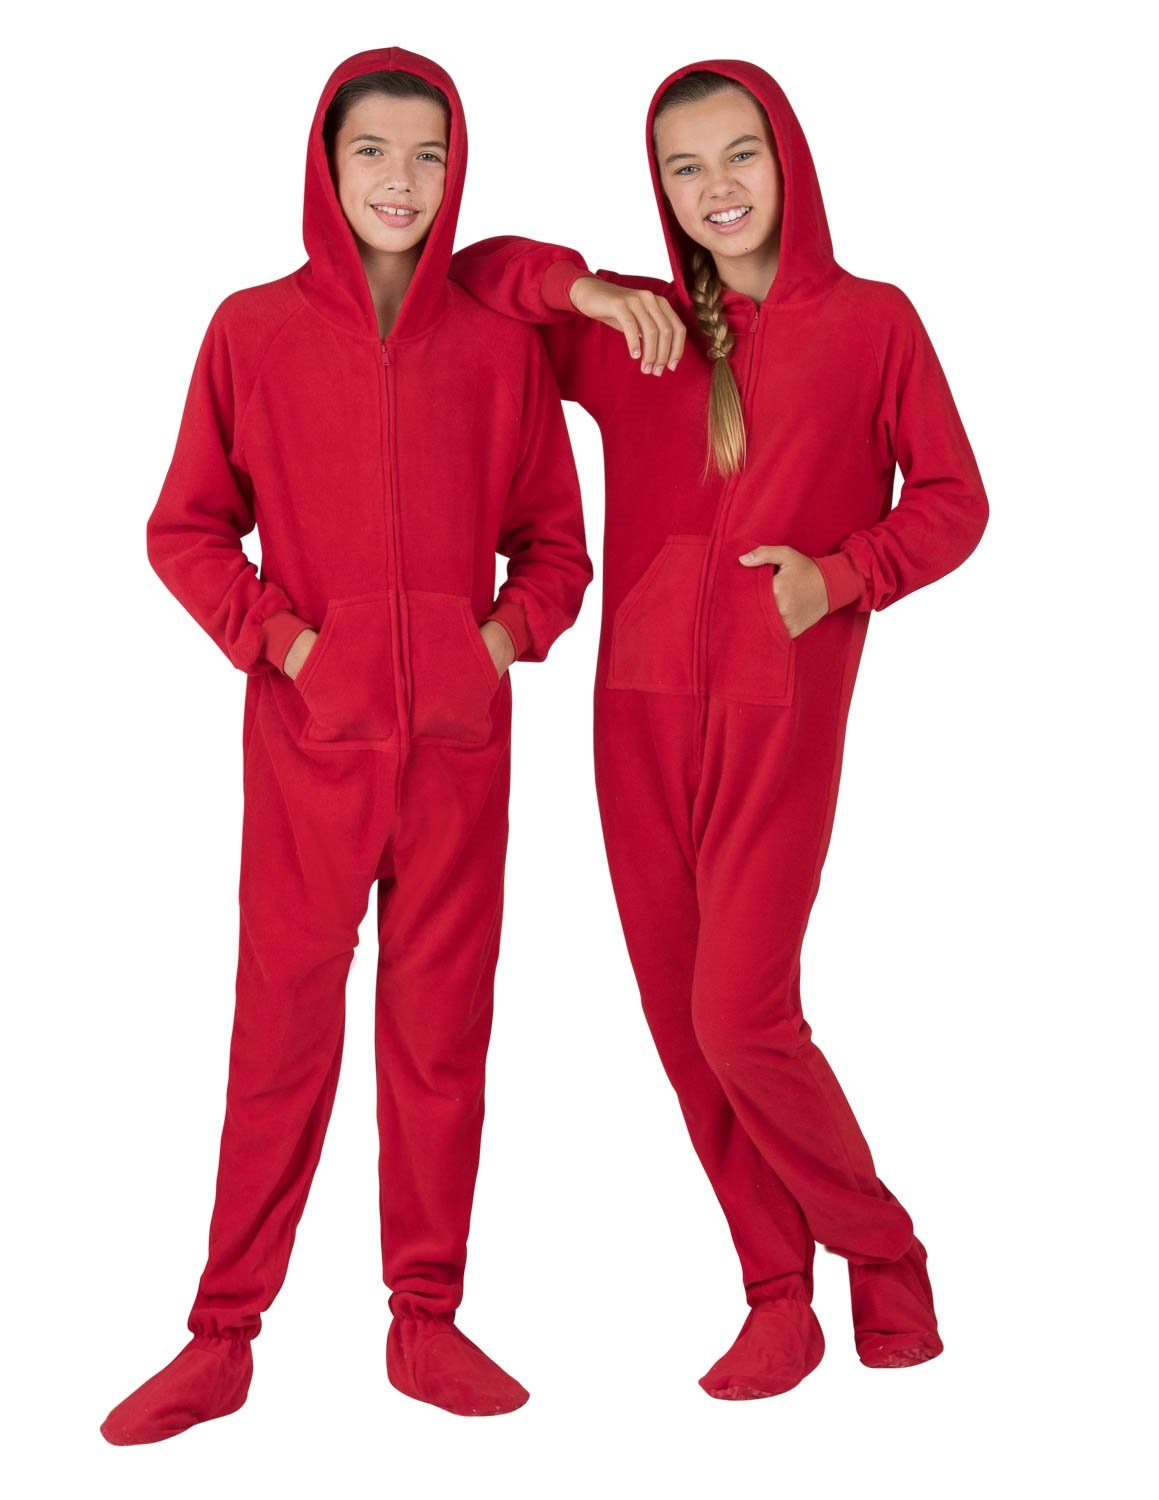 Footed Pajamas - Family Matching Chilli Red Hoodie One Pieces for Boys, Girls, Men, Women and Pets - Adult - Medium Plus/Wide (Fits 5'8 - 5'11") - image 4 of 7